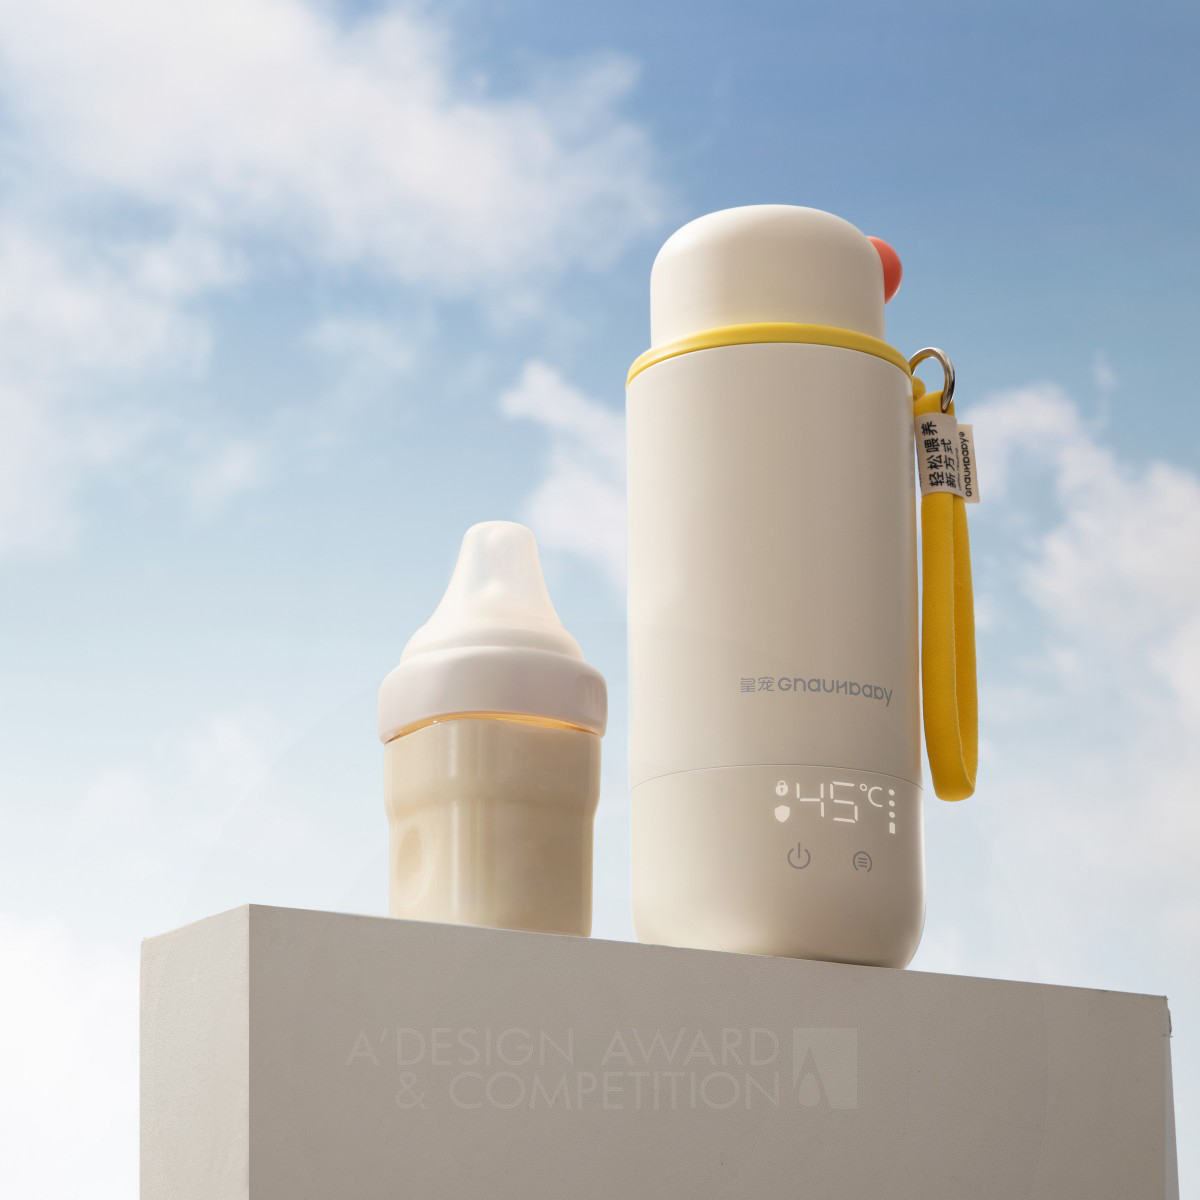 Smart Temp Guardian Bottle by Hangzhou Yaobao Infant Products Co., Ltd Silver Baby, Kids' and Children's Products Design Award Winner 2024 